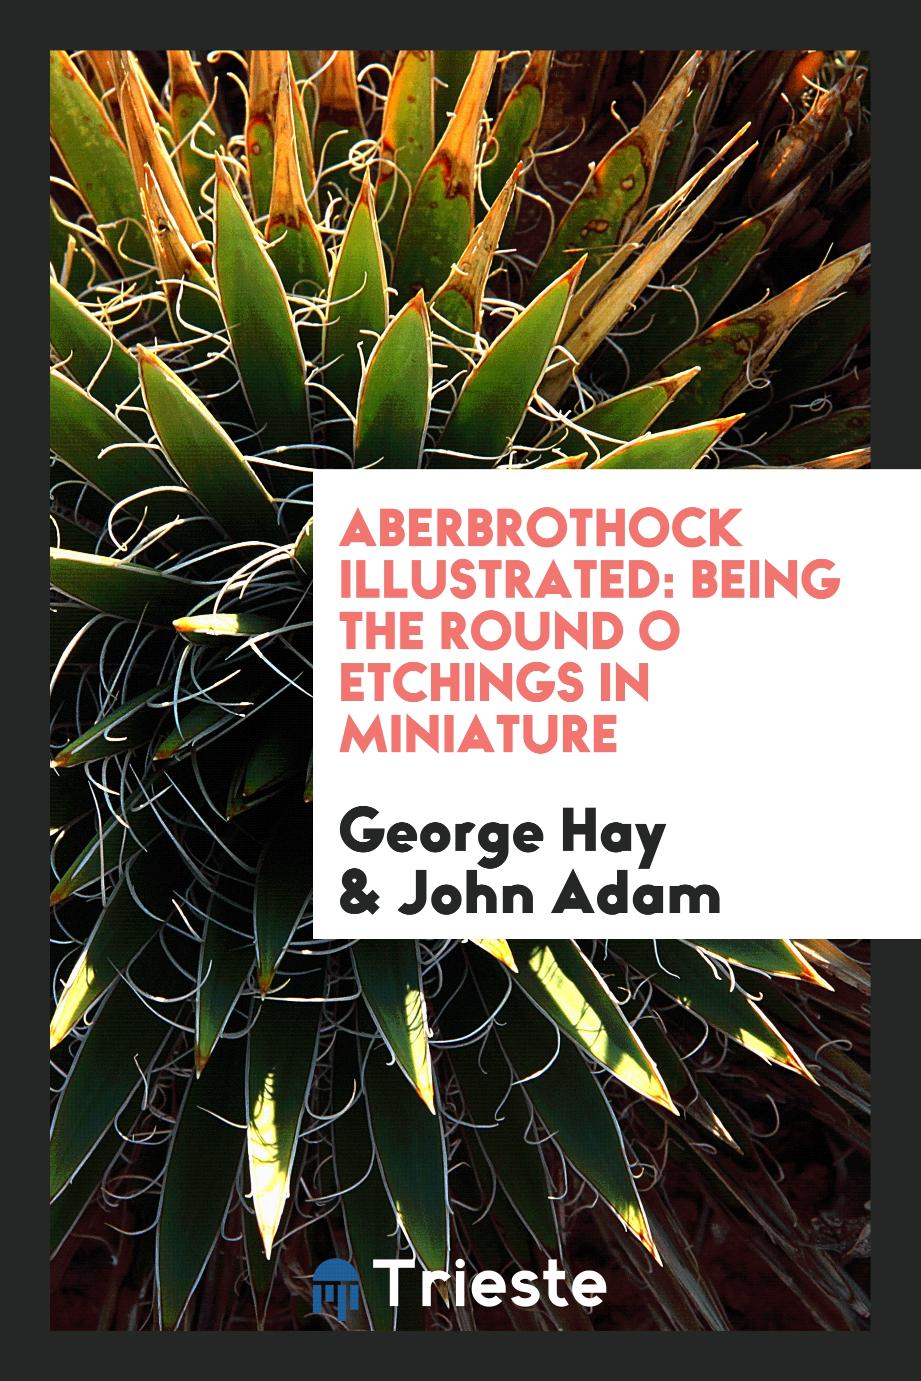 Aberbrothock Illustrated: Being the Round O Etchings in Miniature